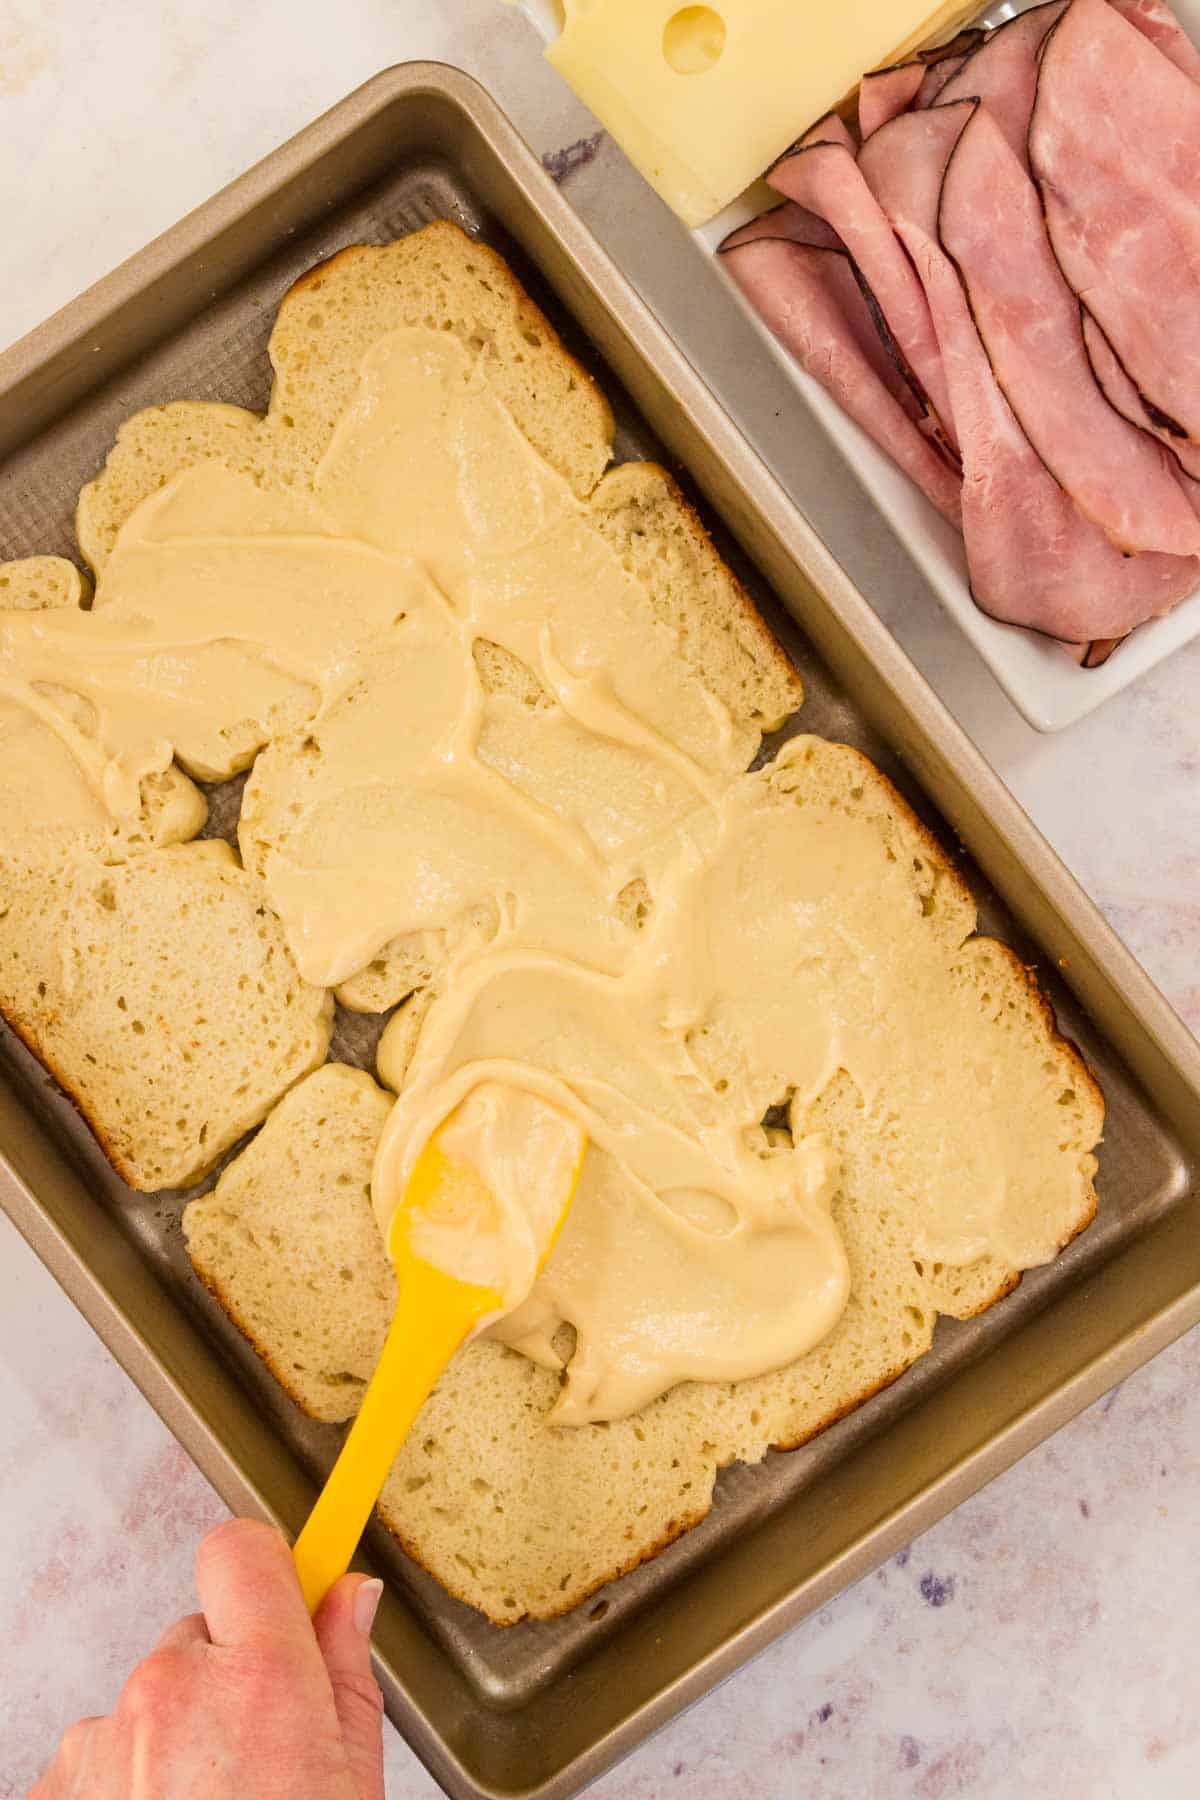 Mustard is spread over a layer of Hawaiian rolls in a baking pan.